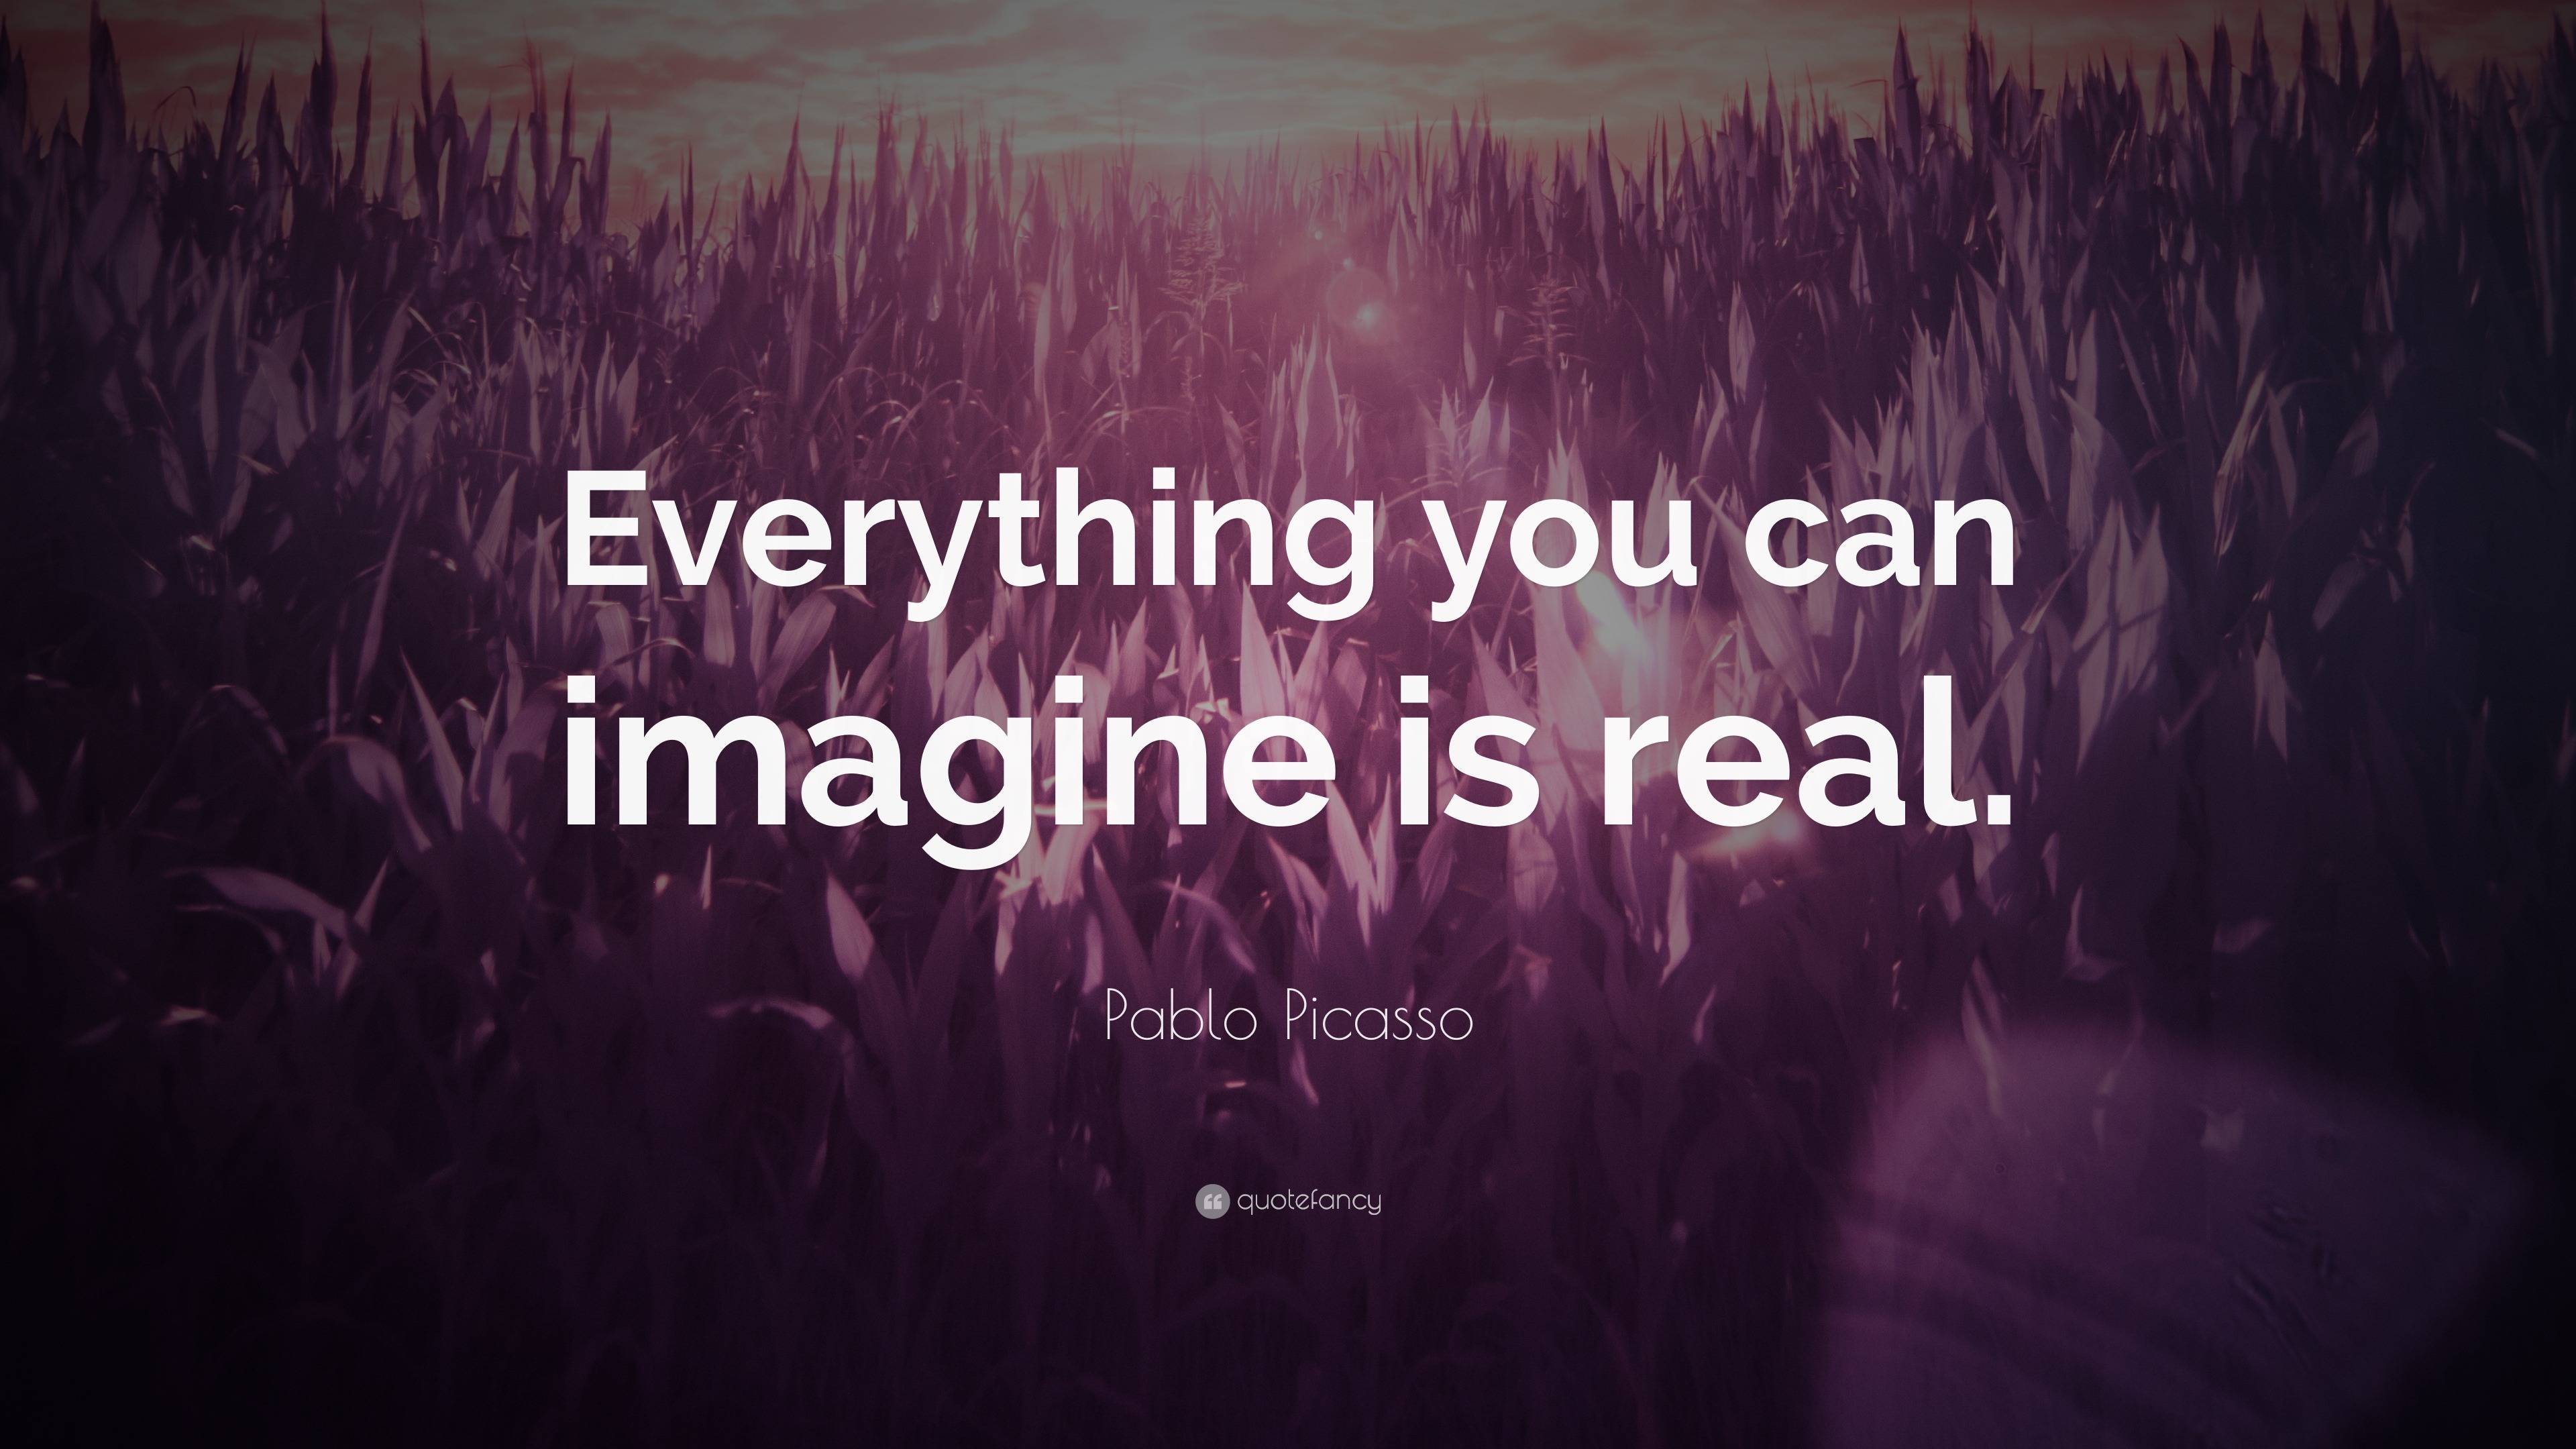 Everything you can imagine is real Picasso. Everything you imagine is real. Everything you can imagine. You can imagine is real.